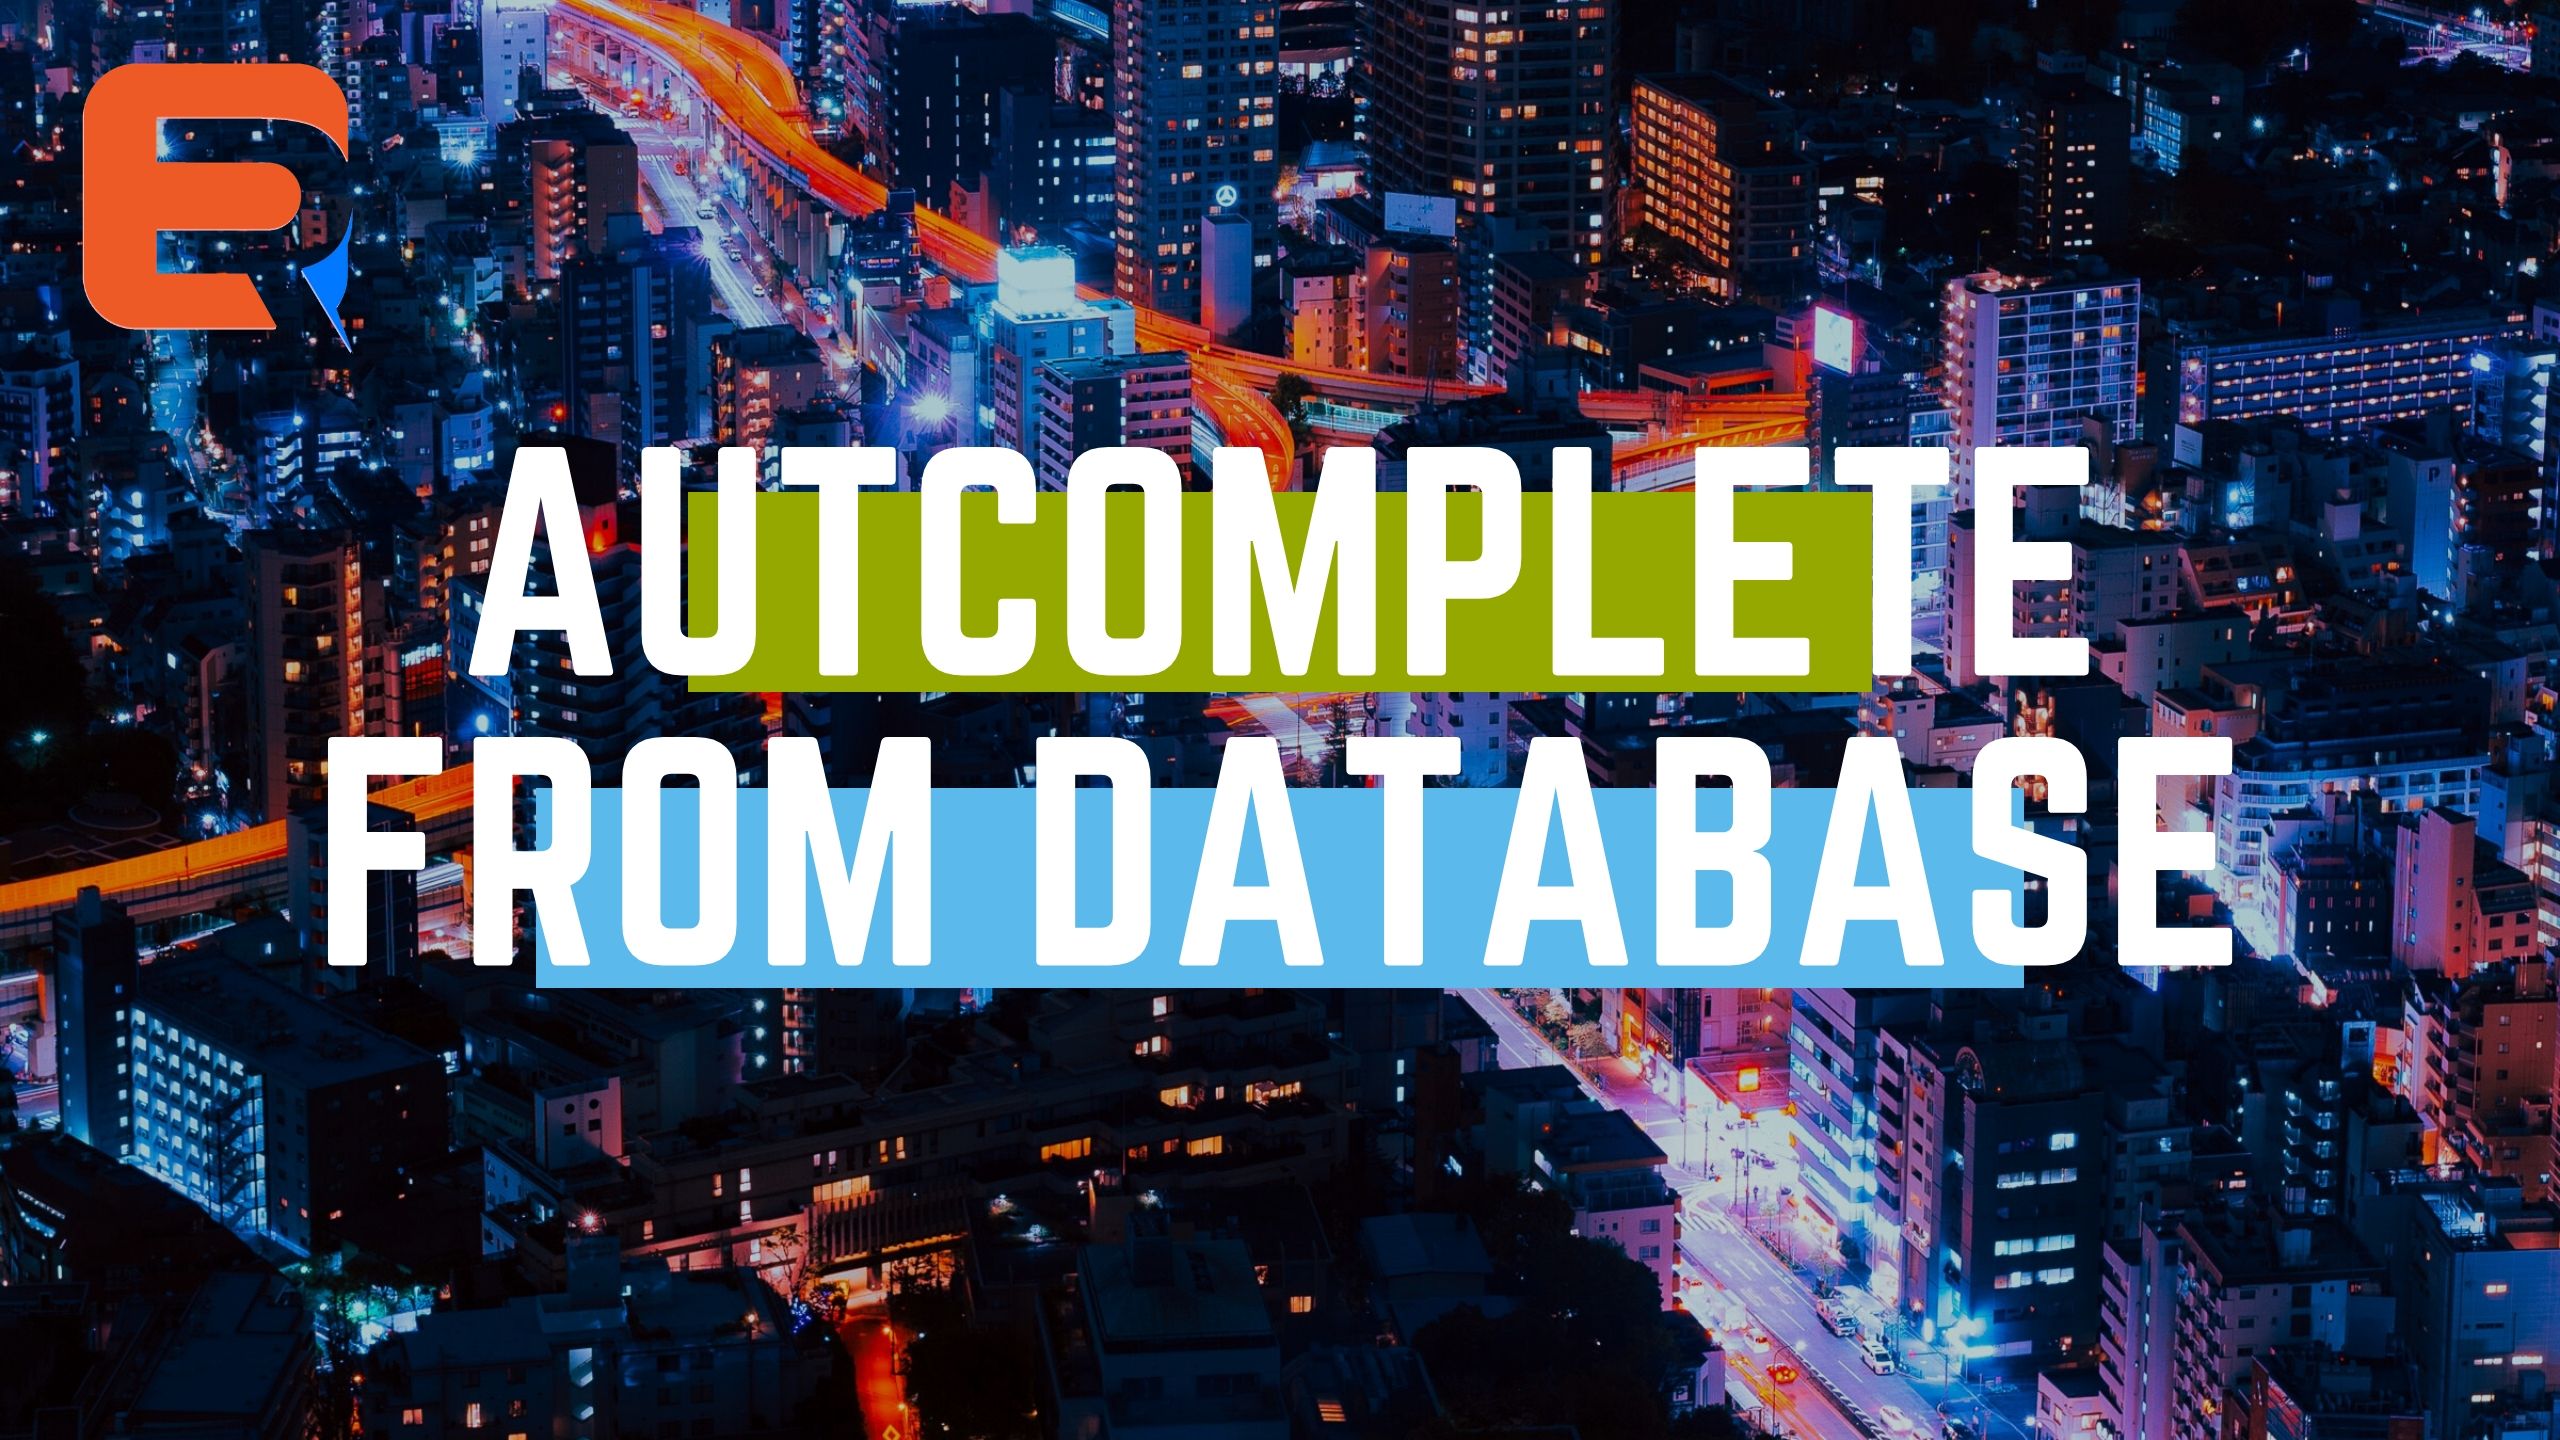 AUTOCOMPLETE FROM DATABASE